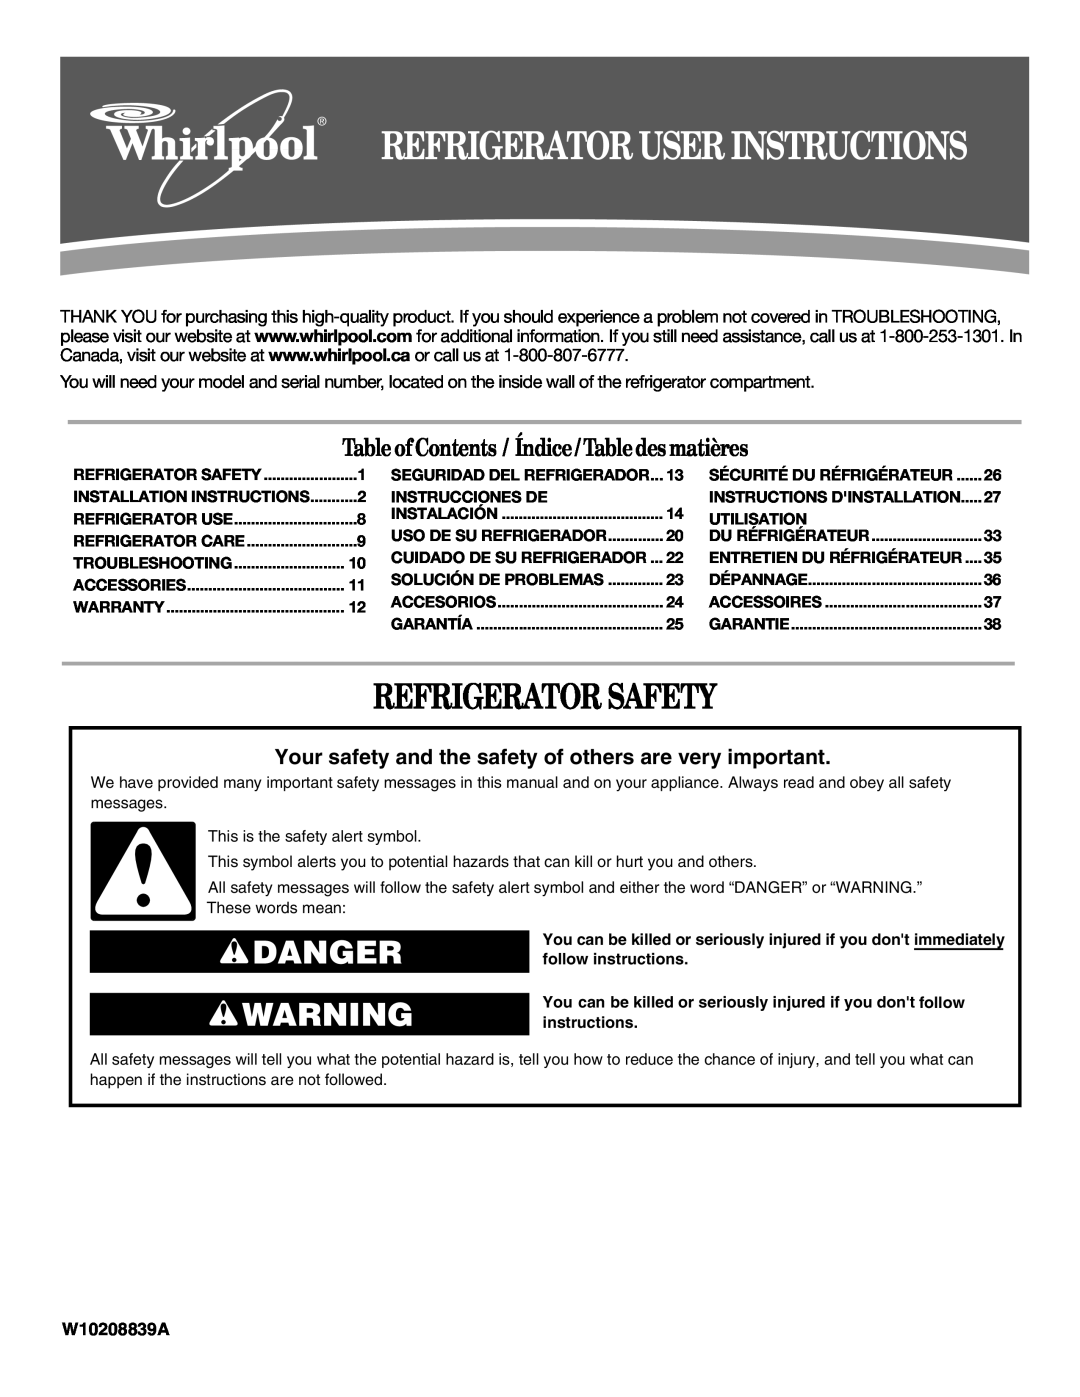 Whirlpool GR2FHMXV installation instructions Refrigerator Safety, Danger, Table of Contents / Índice / Tabledes matières 